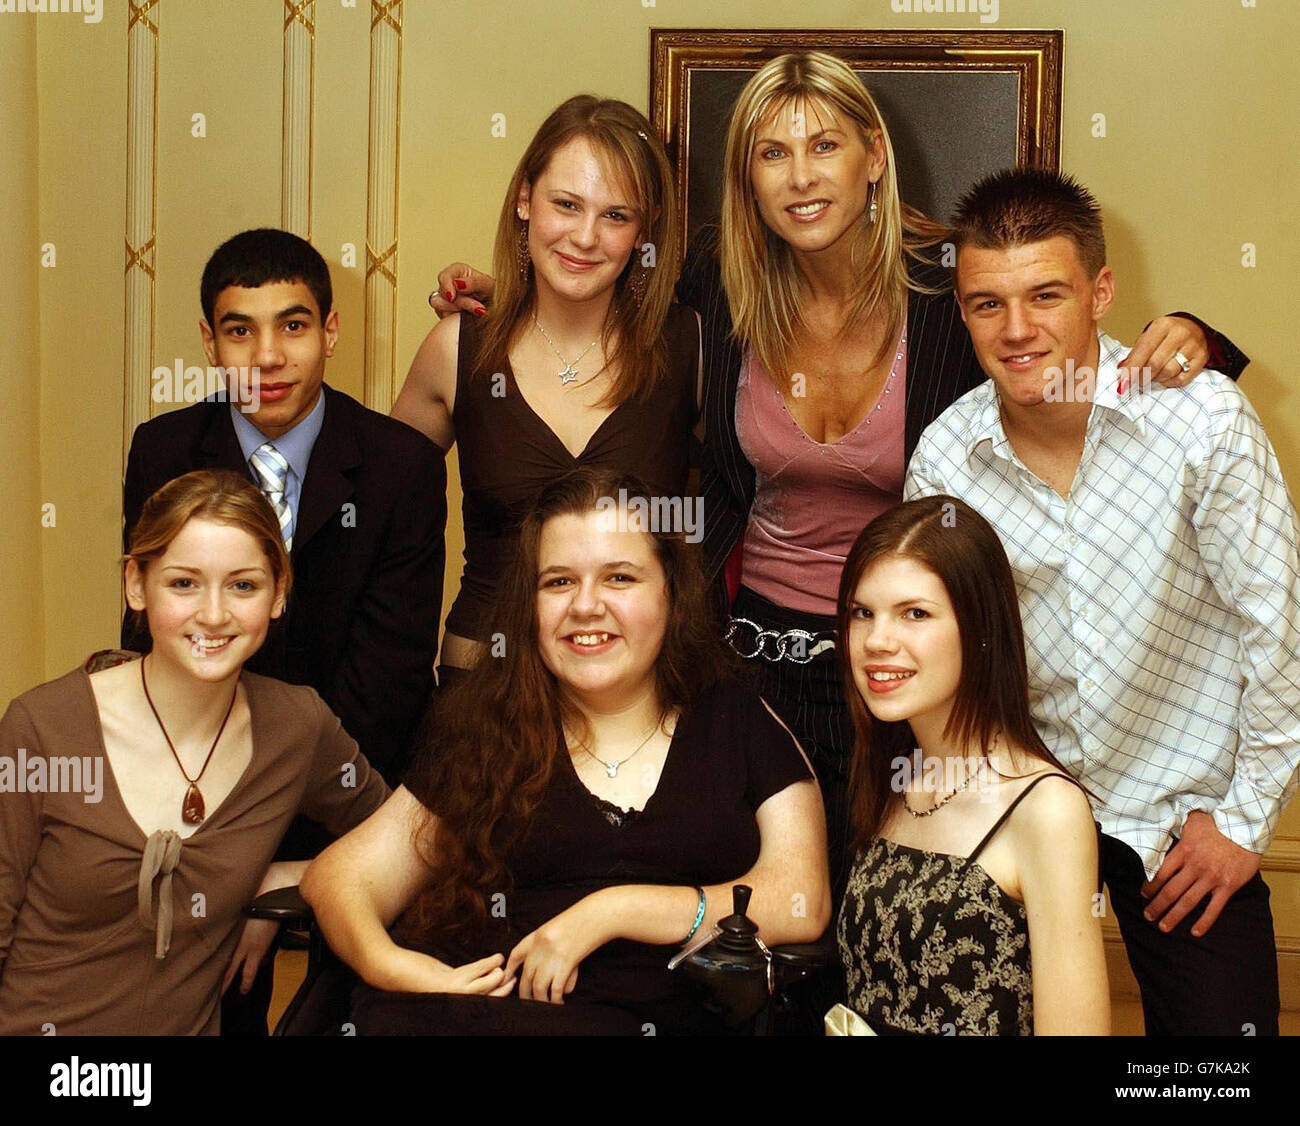 The winners of the Champion children of the year, pose with former British Olympic swimmer Sharron Davies MBE, at a gala luncheon in aid of the NSPCC, at the Millennium Hotel. The winners are (top row, from left to right) Marc Branch, 16 from Streatham, Emma Campbell, 16 from Liverpool, Sharron Davies, Ben Middleton, 15 from Leicester, (bottom row, from left) Katy Wooly, 15 from Exeter, Leanne Beetham, 17 from Hull, and Danielle Baker, 14 from Cheshire. Stock Photo